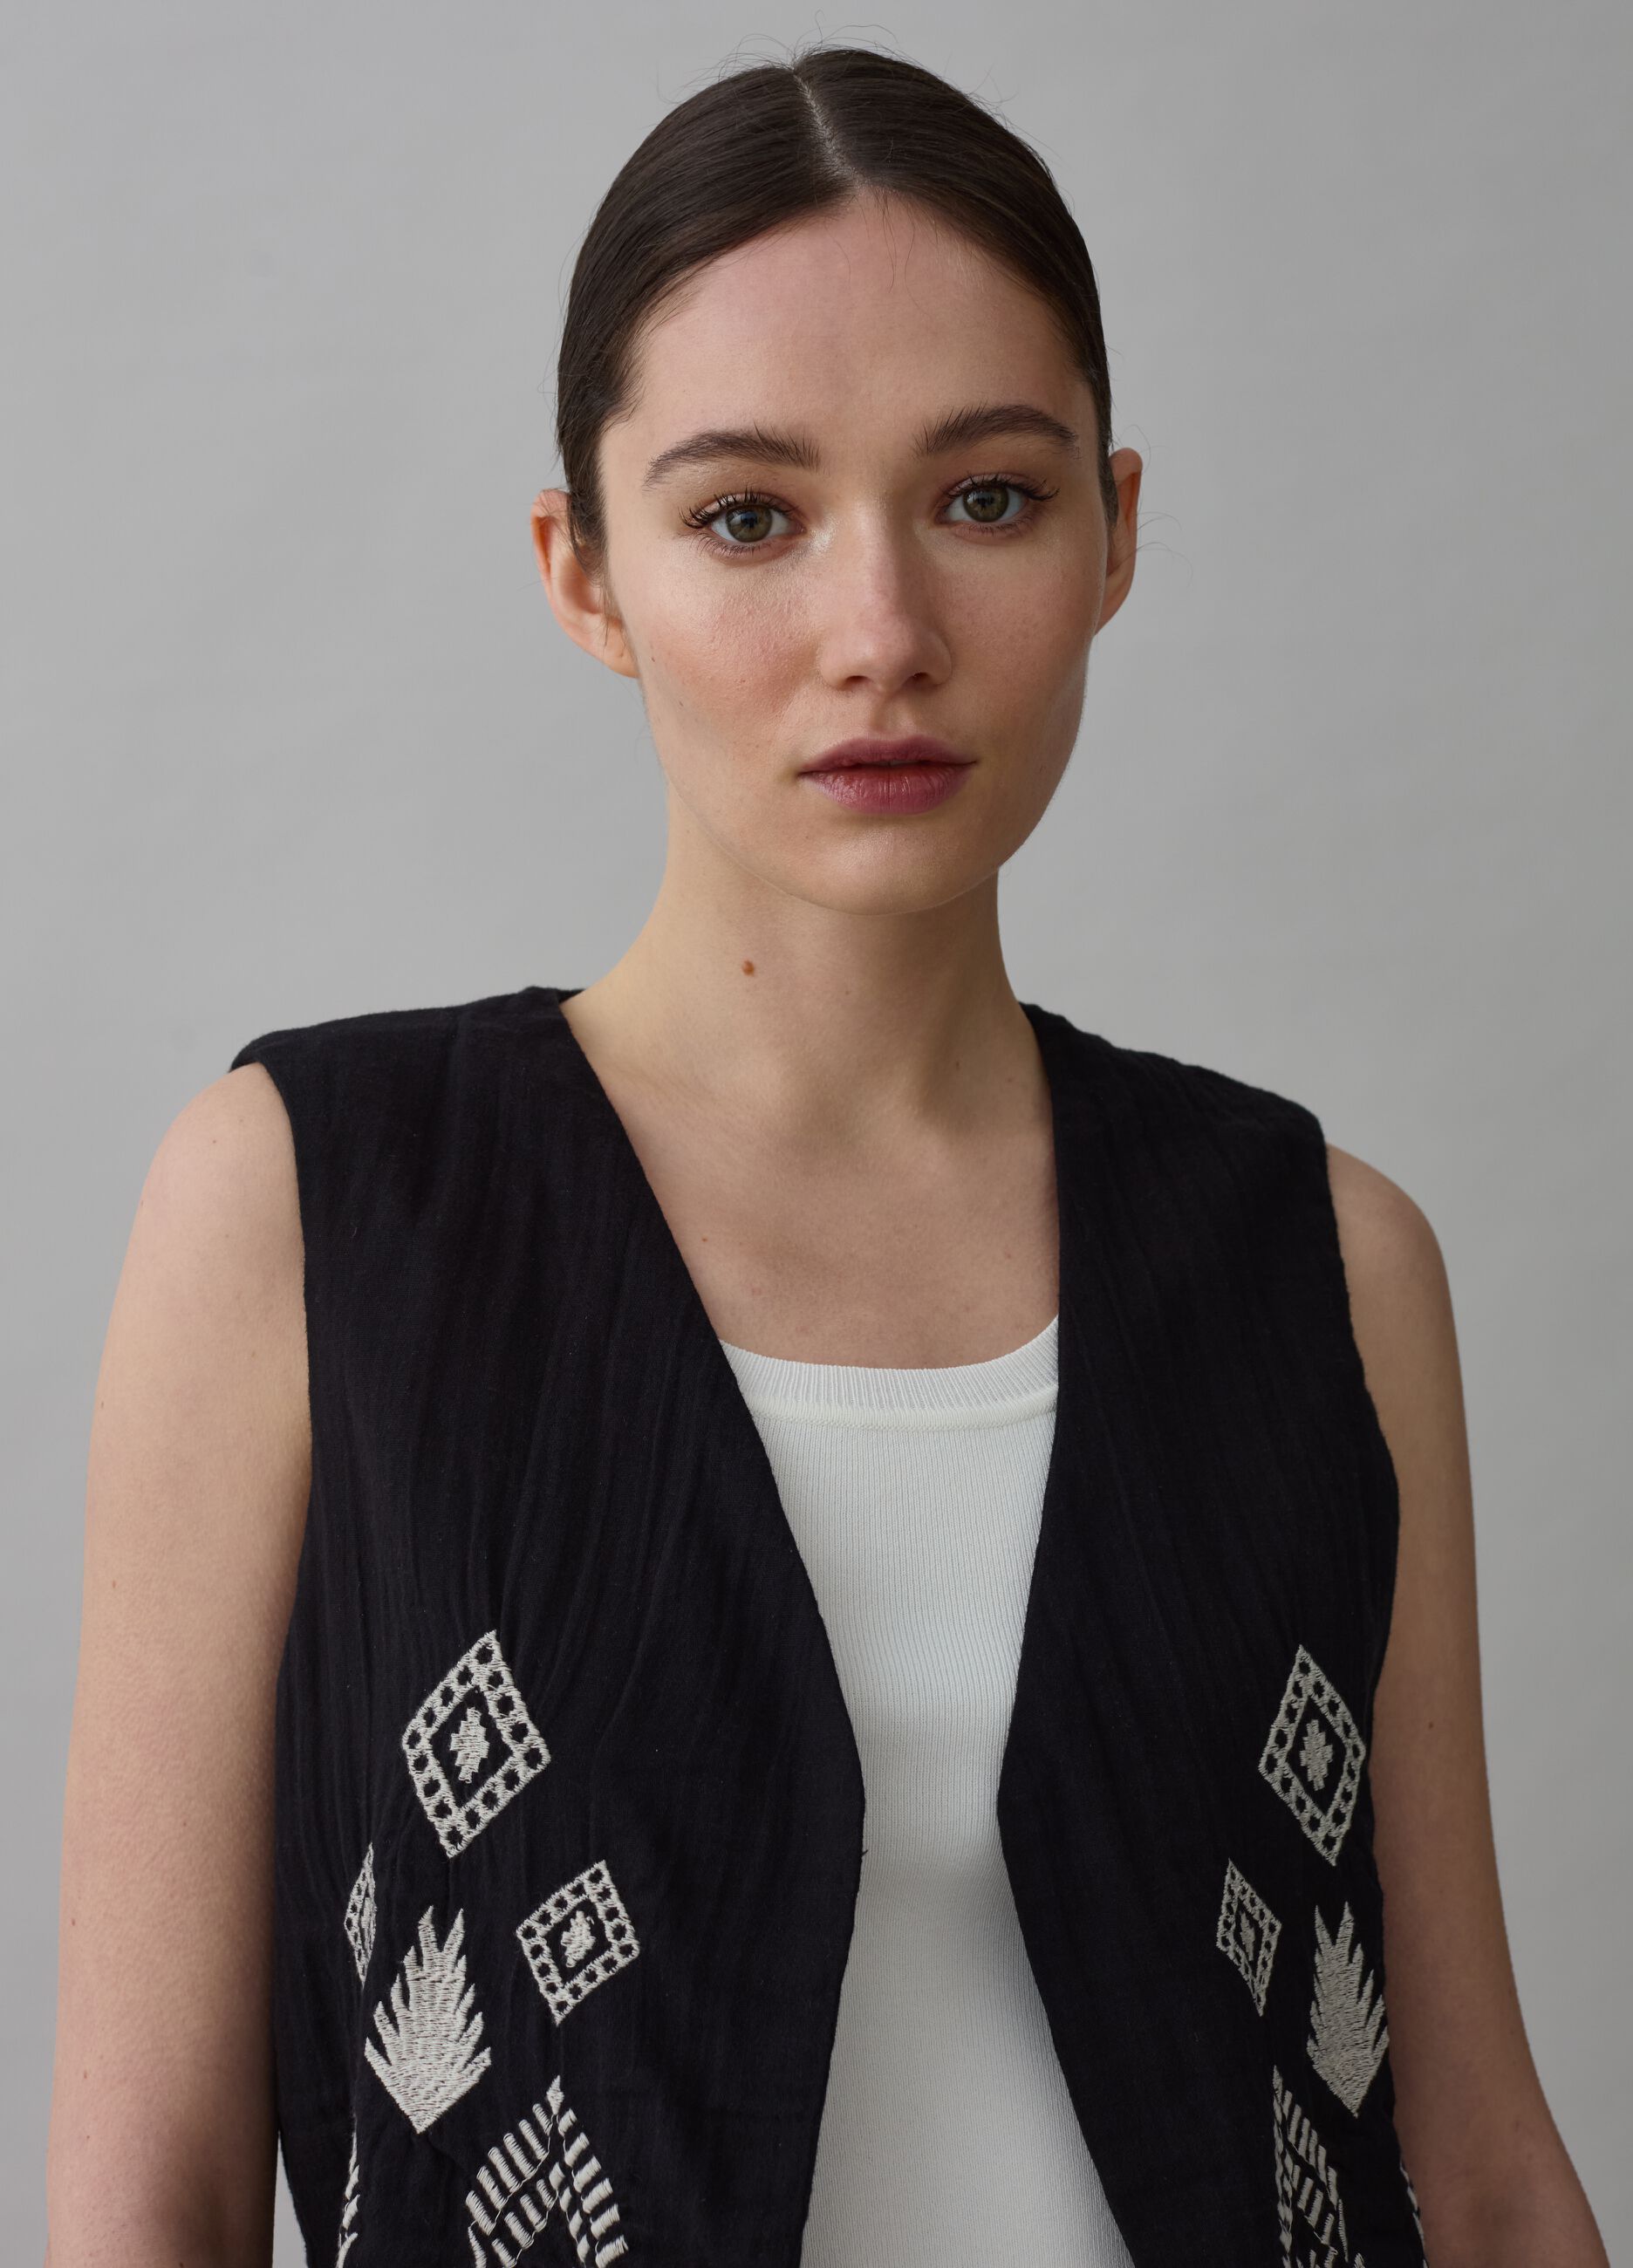 Open gilet with ethnic embroidery